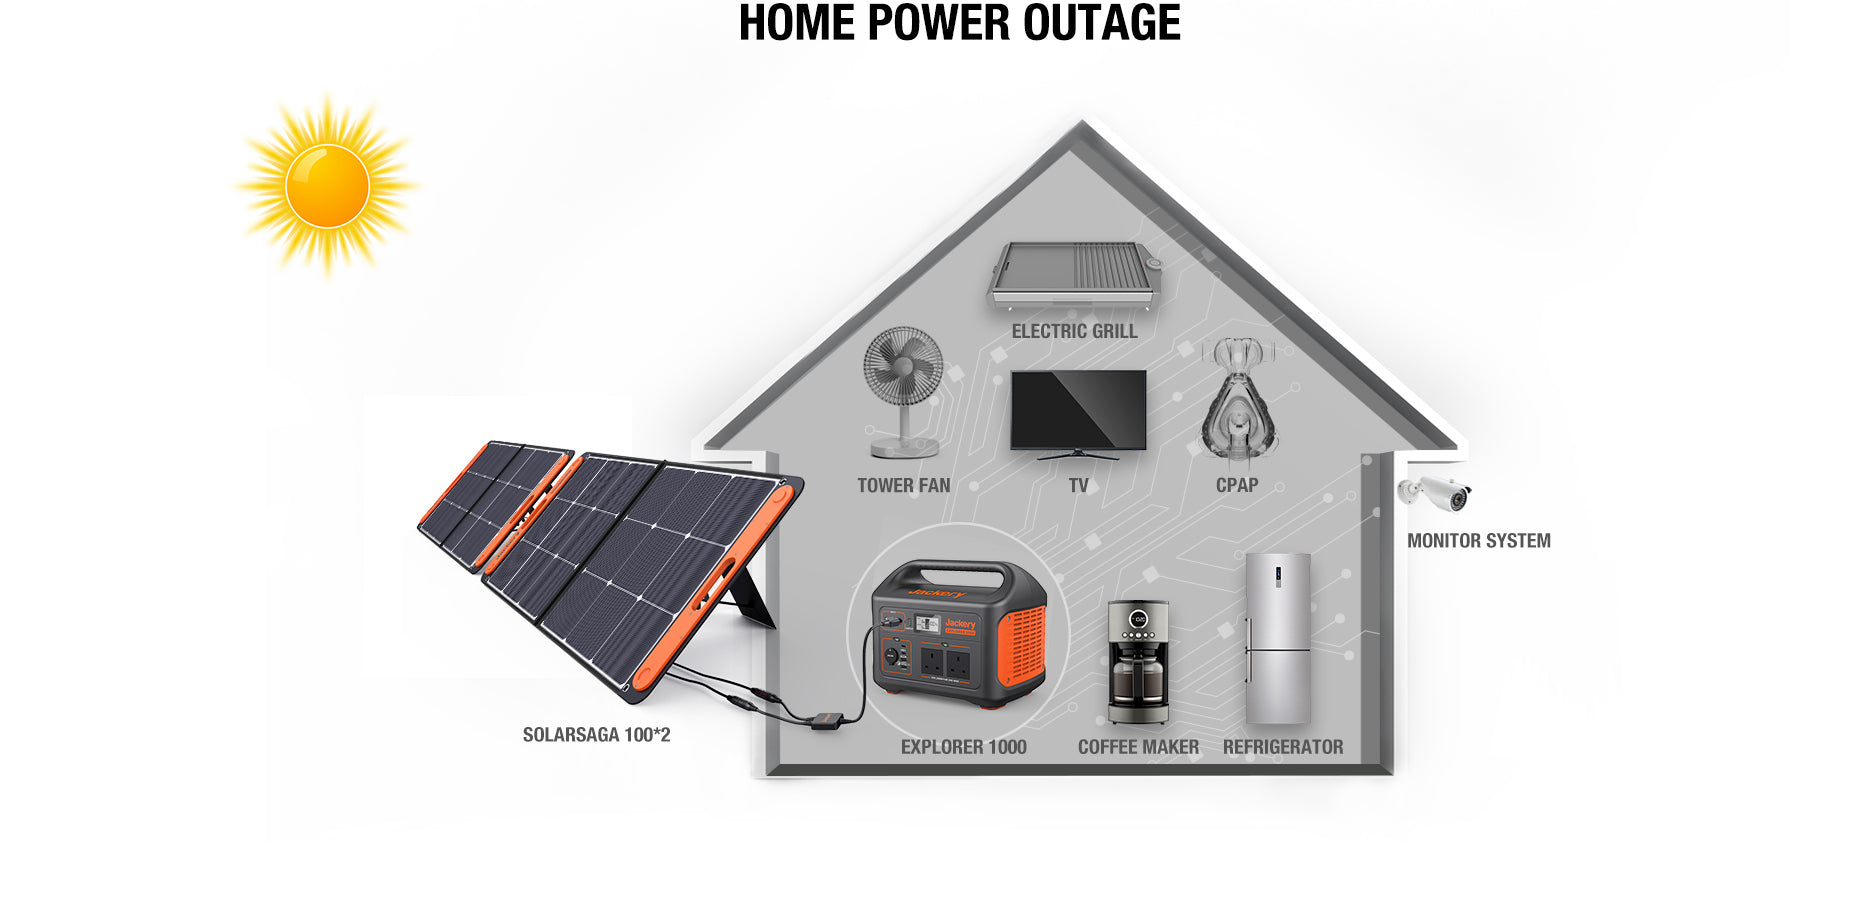 jackery backup power supply for home